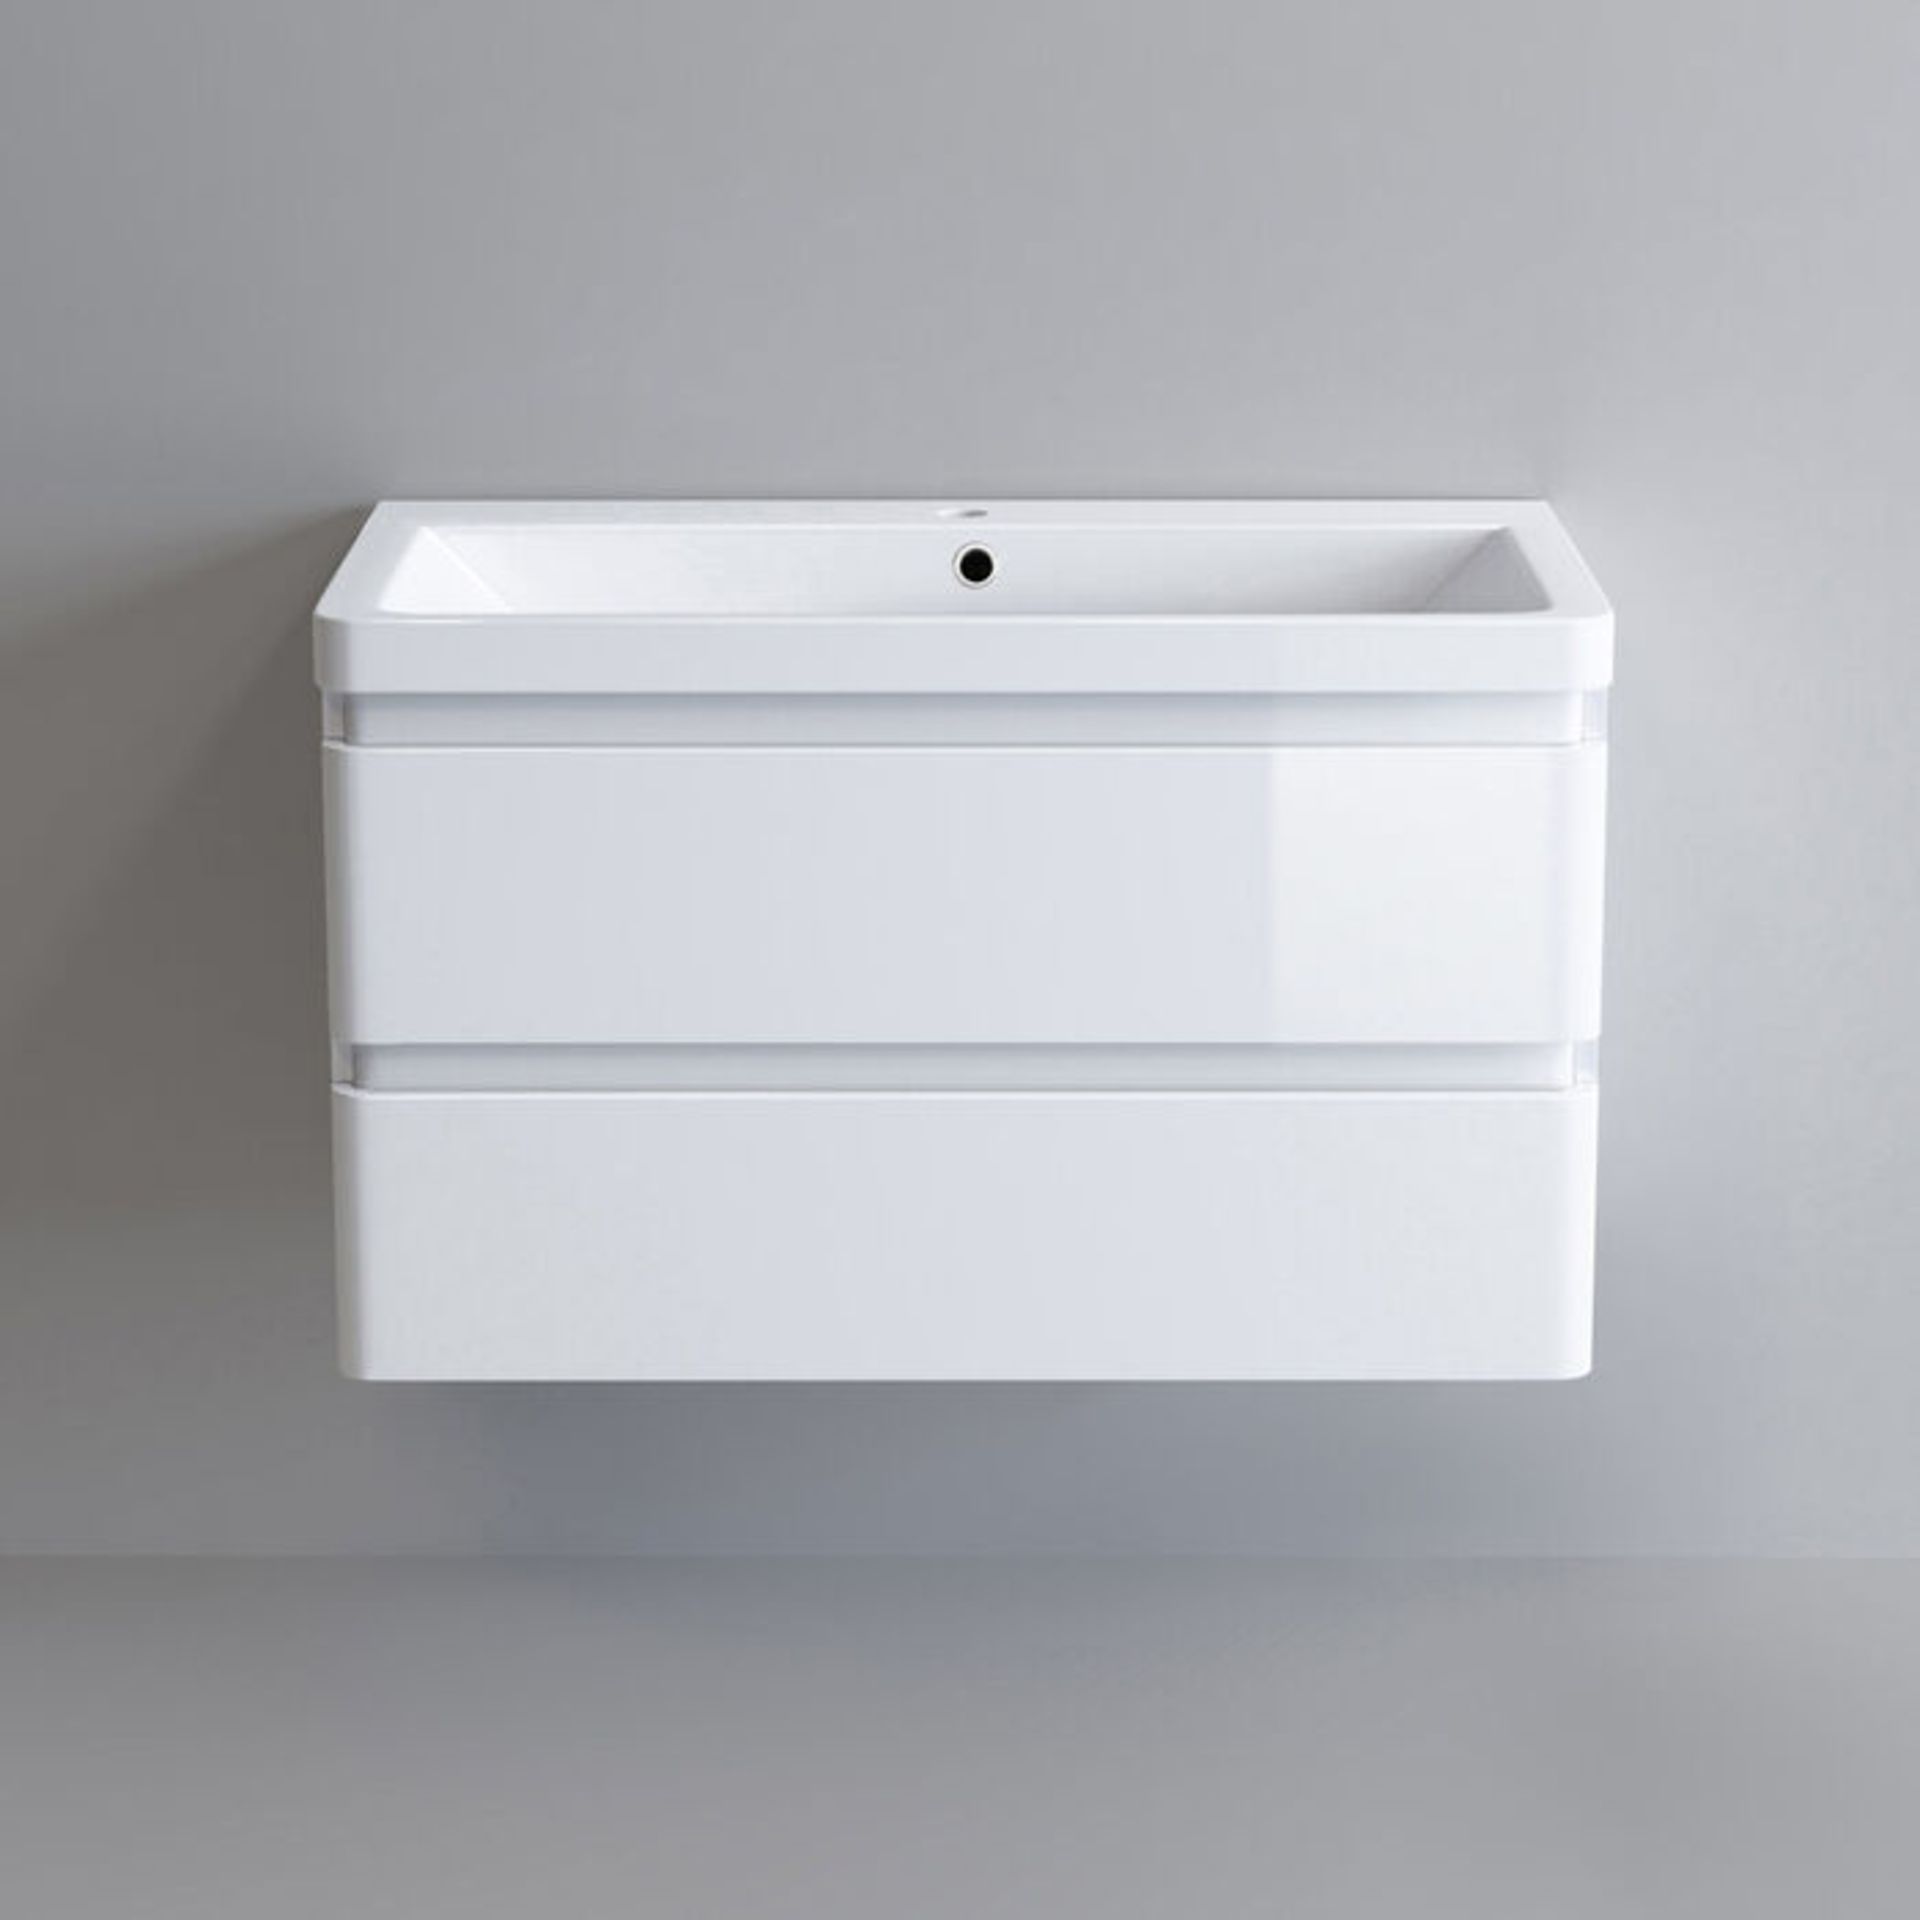 (PC8) 800mm Denver Gloss White Built In Sink Drawer Unit - Wall Hung. RRP £699.99. Comes compl...( - Image 5 of 5